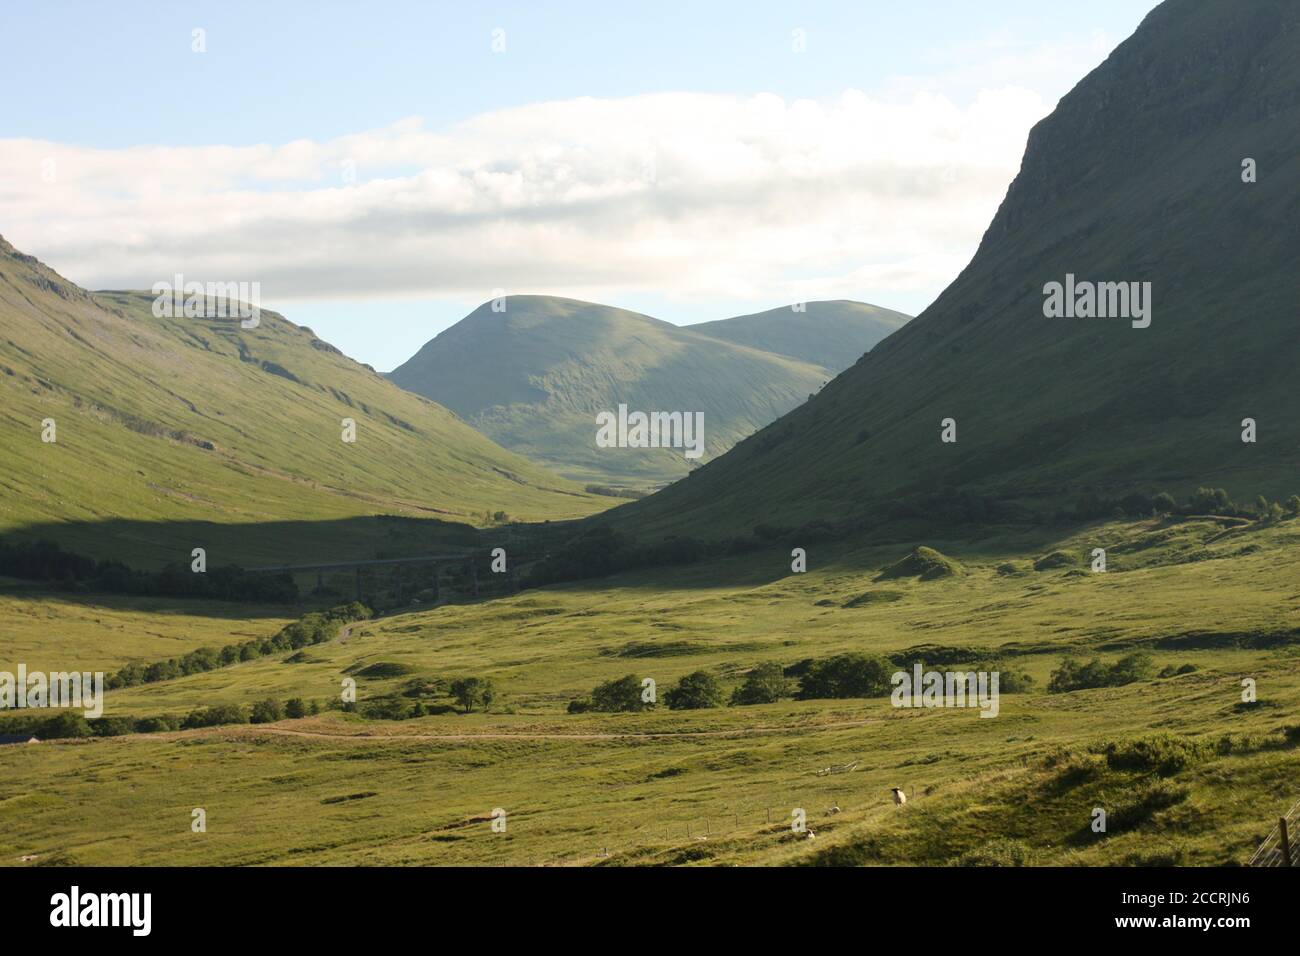 Early morning view of mountains and valley from the Caledonian sleeper train from London to Fort William, Scotland, UK Stock Photo